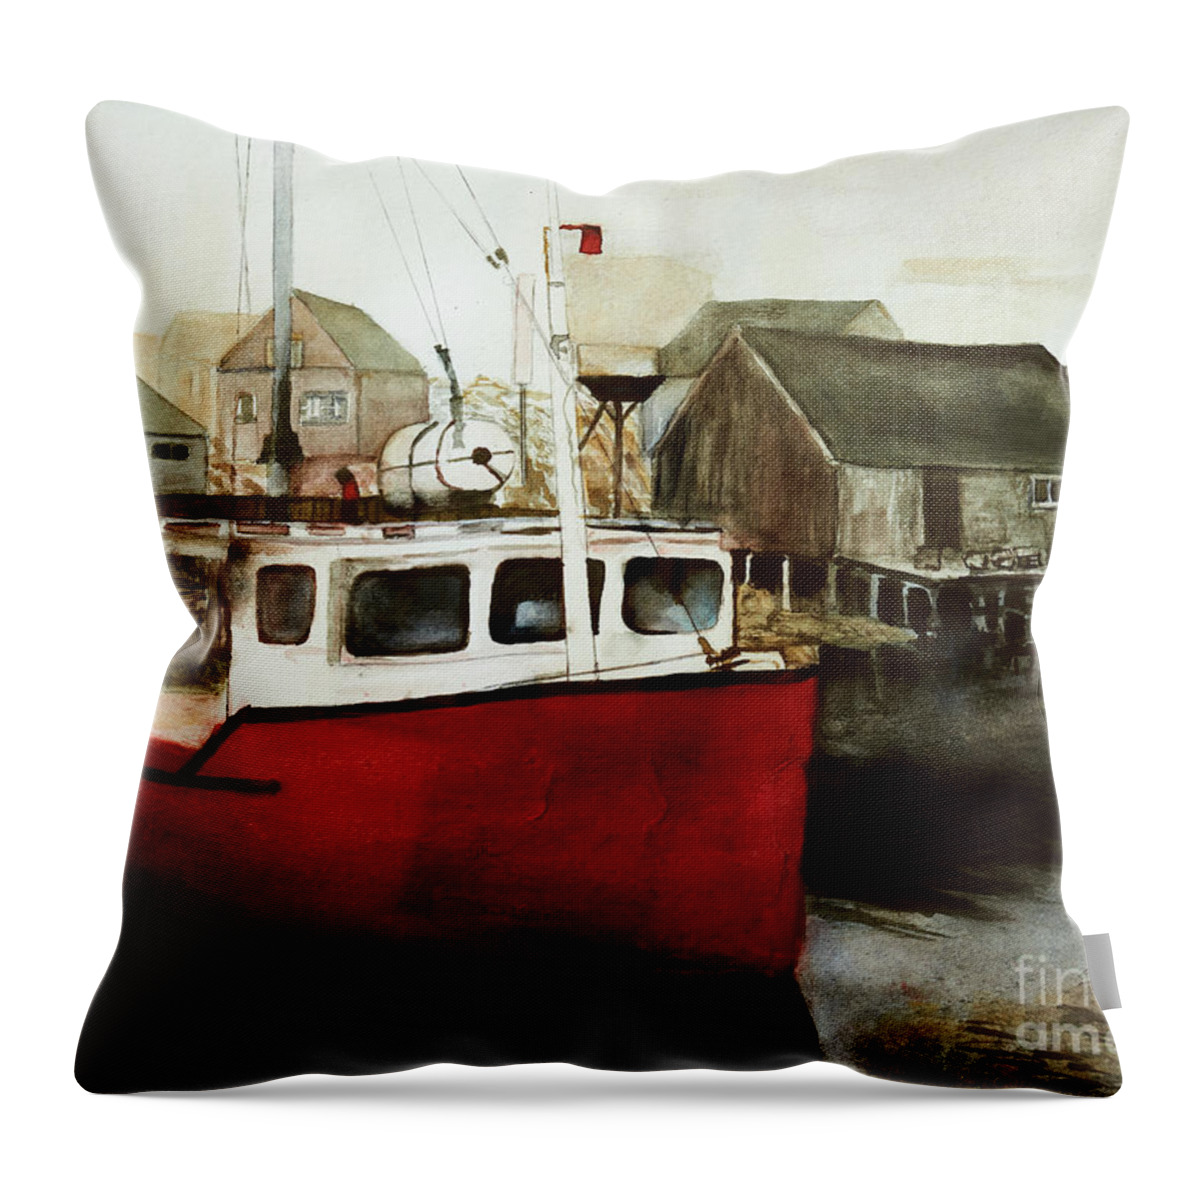 Art - Watercolor Throw Pillow featuring the painting Tranquility - Watercolor Painting by Sher Nasser